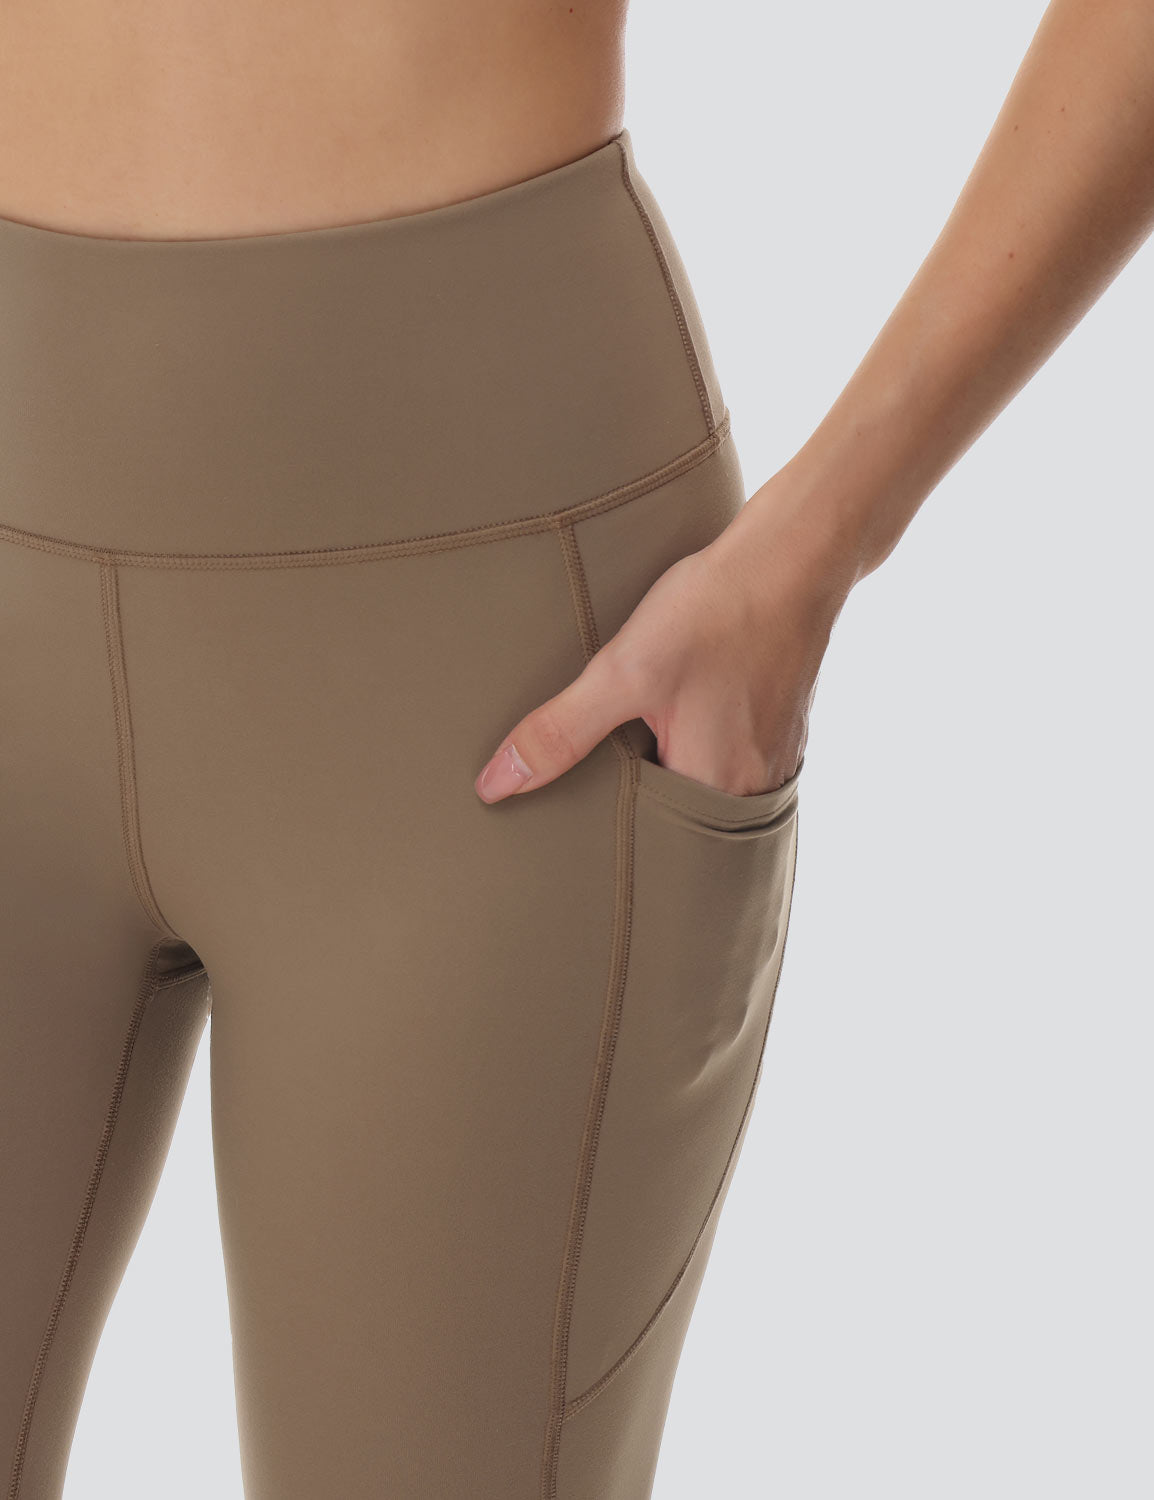 Baleaf Women's Comfortable High-Rise Pocketed Flared Pants Cocoa Crème Details